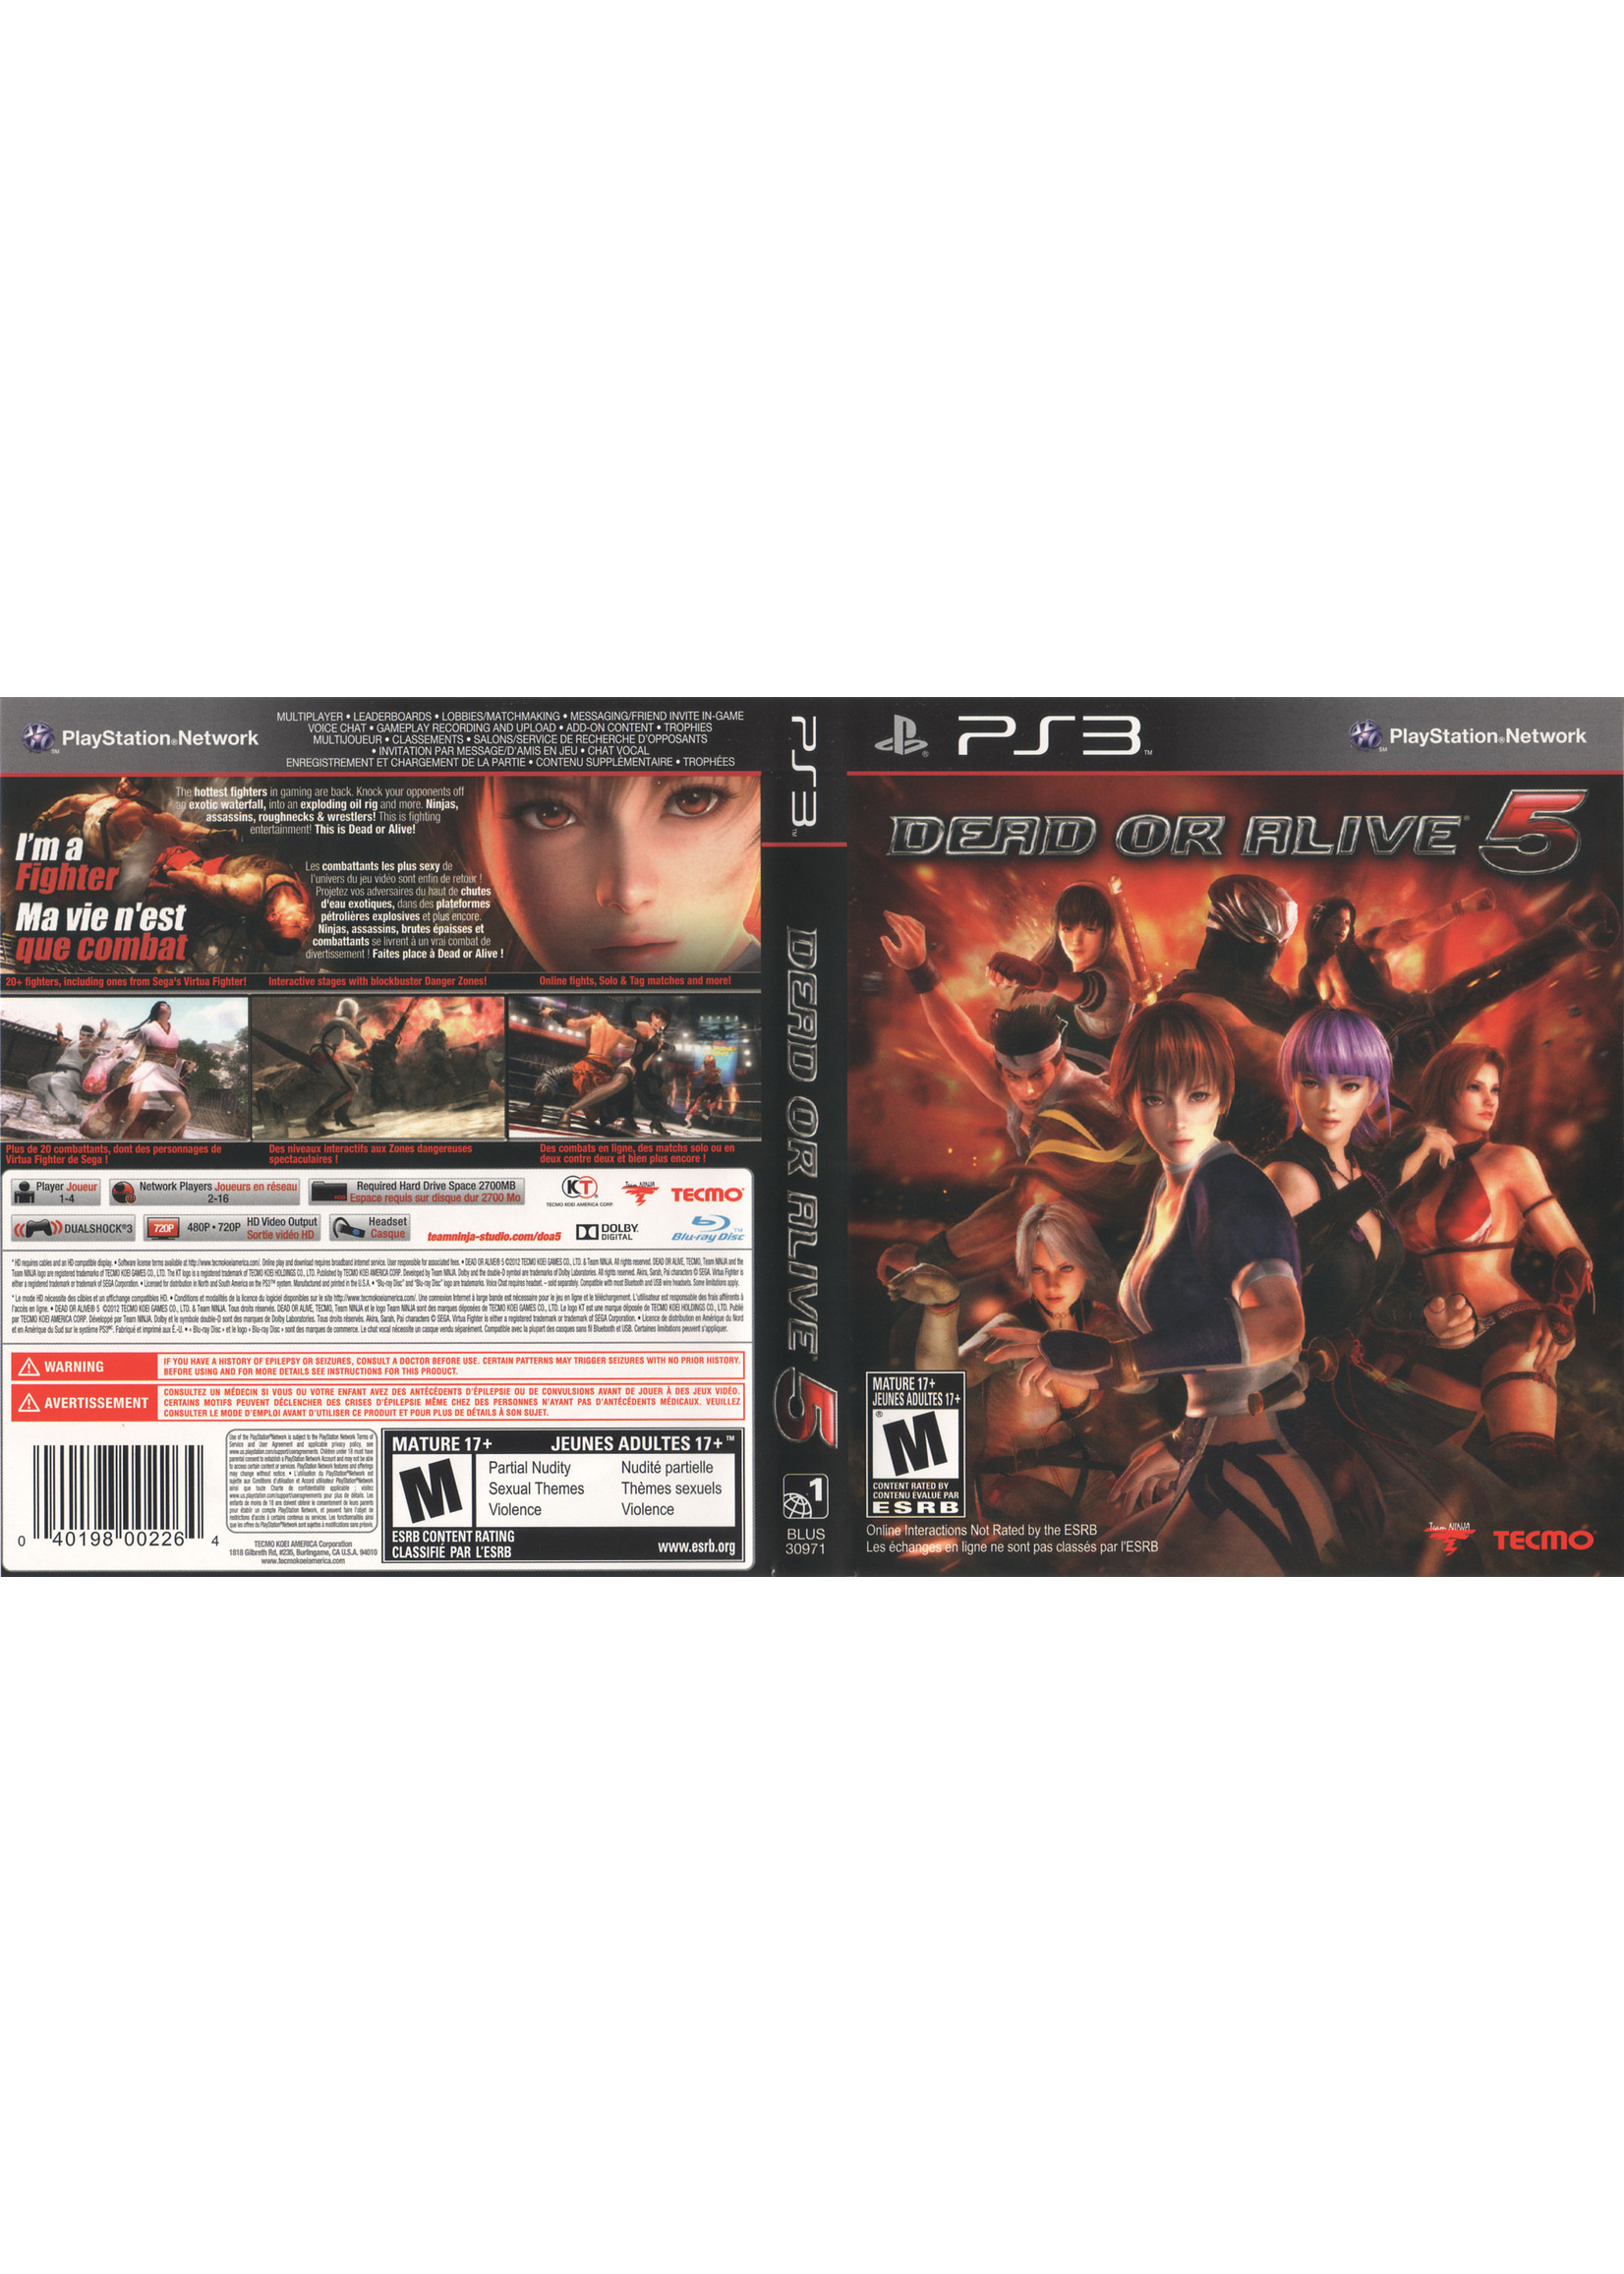 Sony Playstation 3 (PS3) Dead or Alive 5